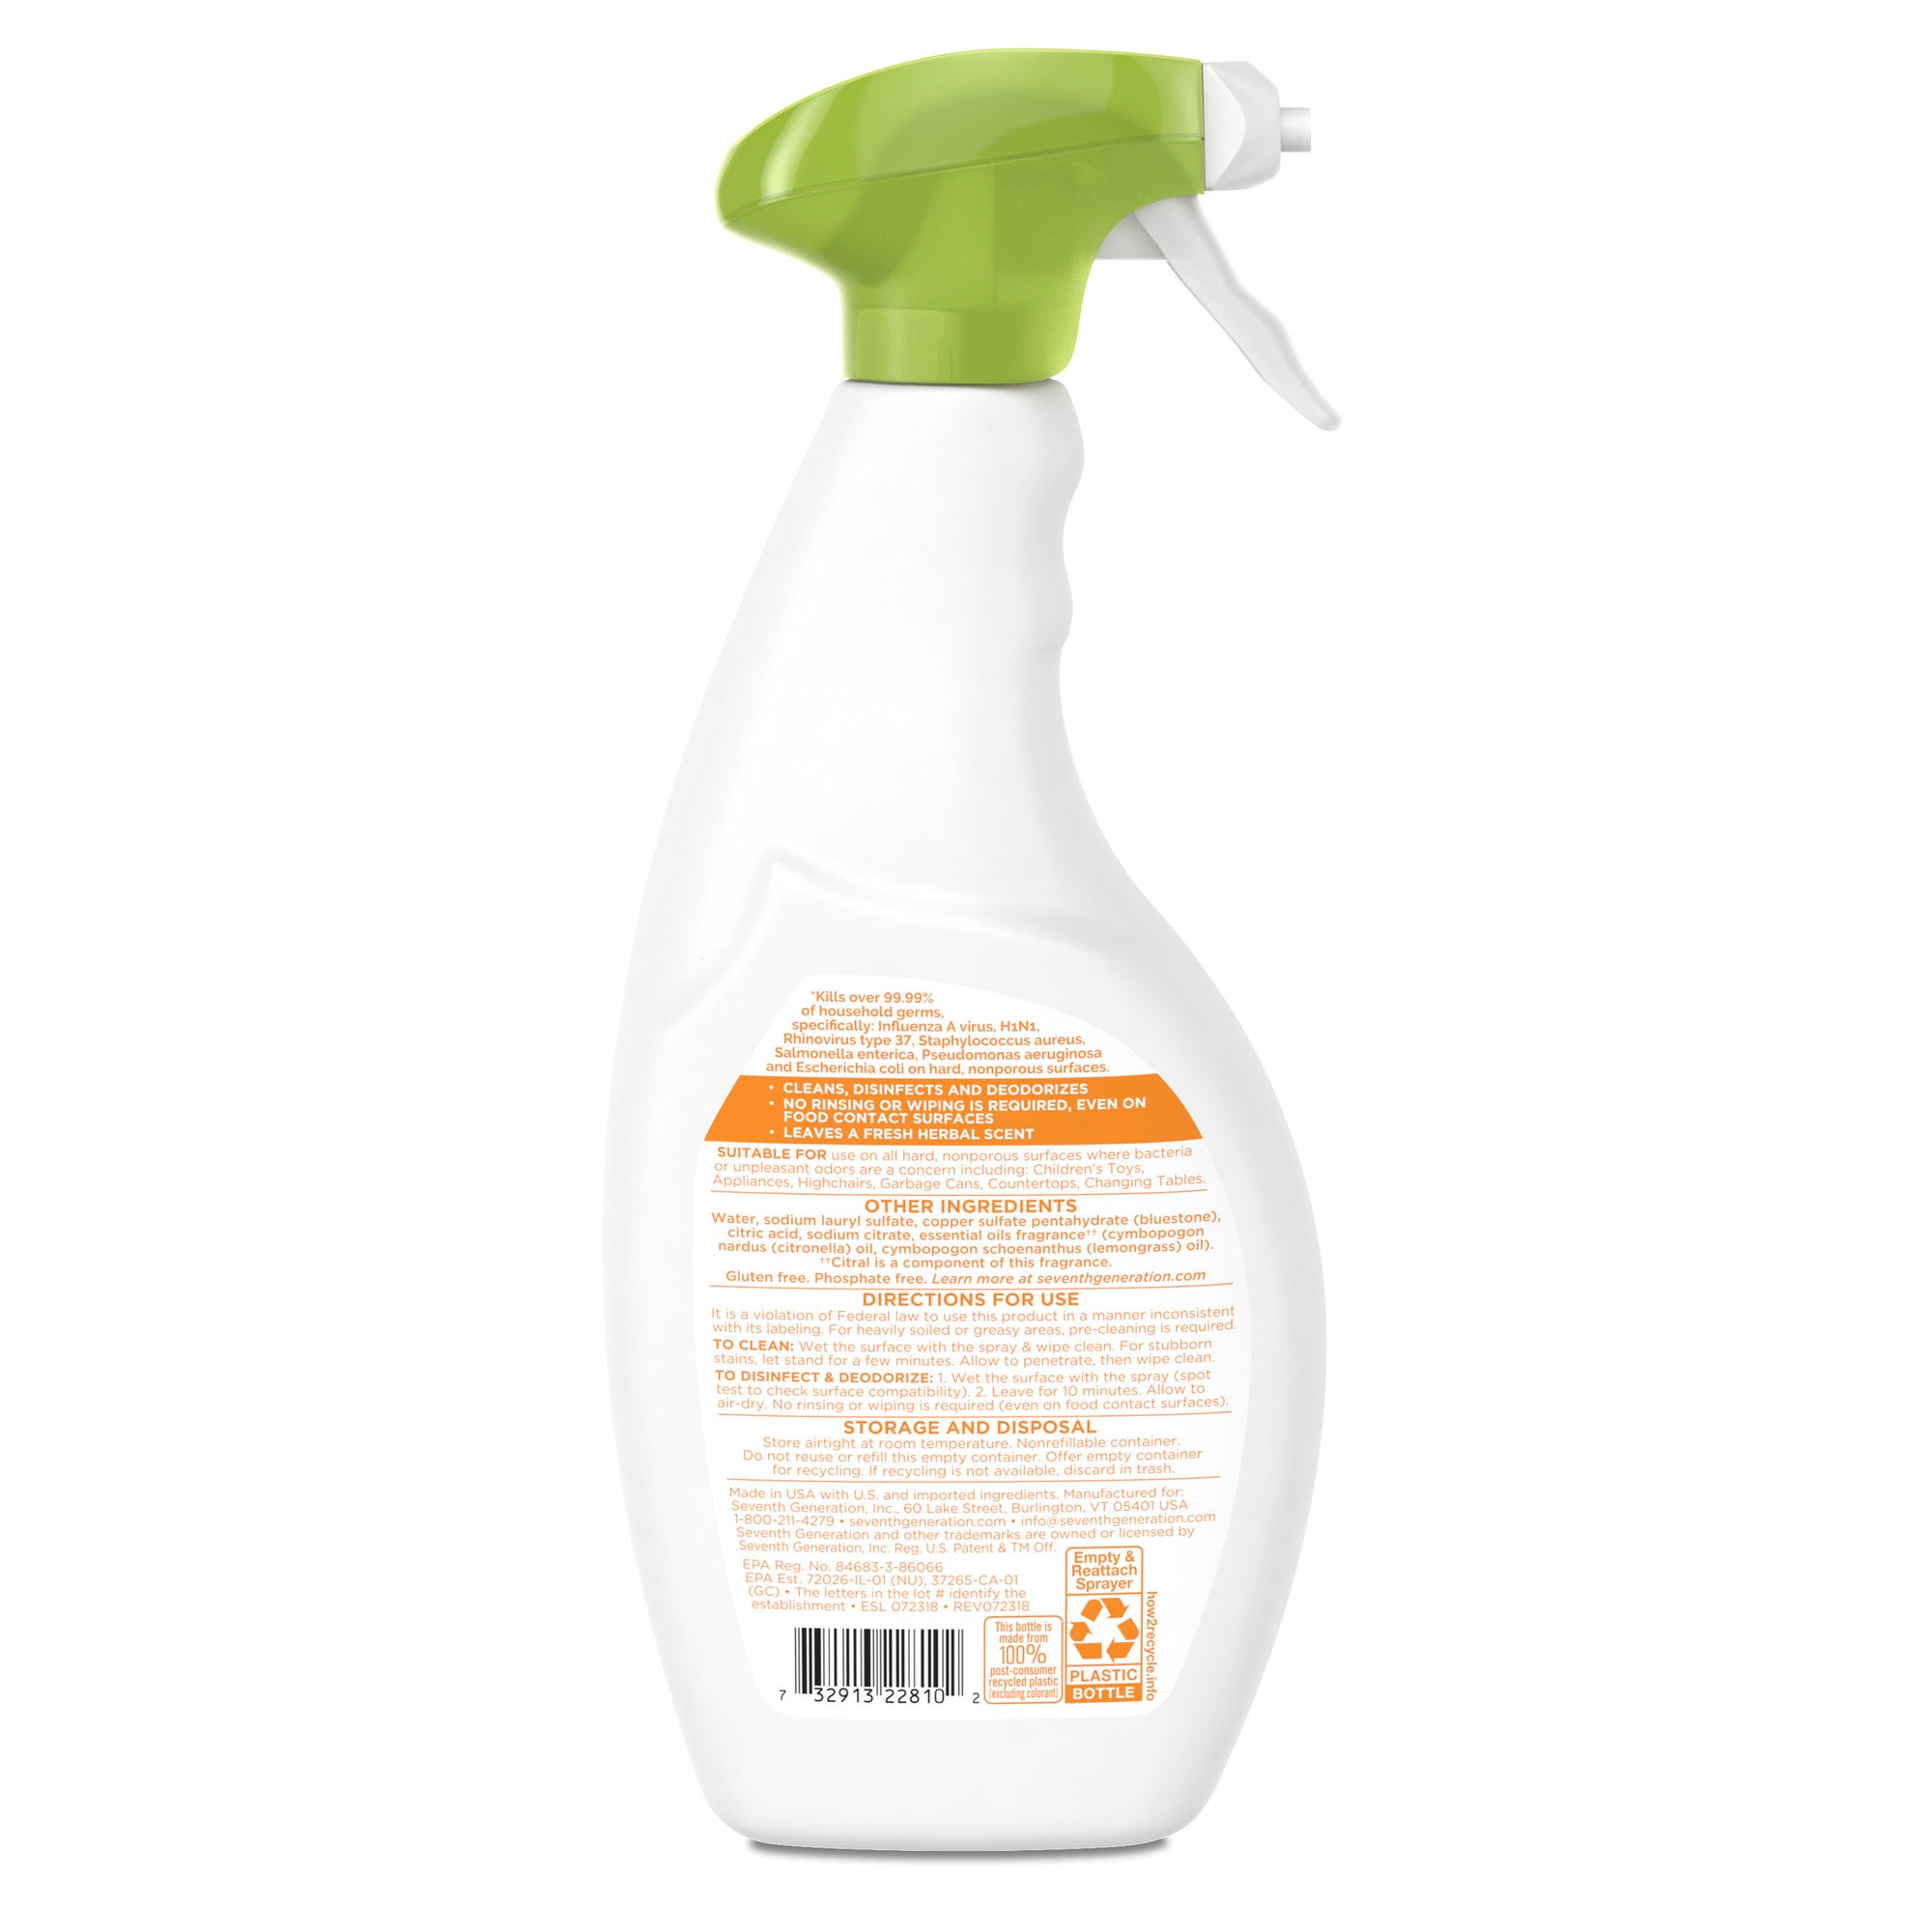 Disinfecting multi surface cleaner sprayer